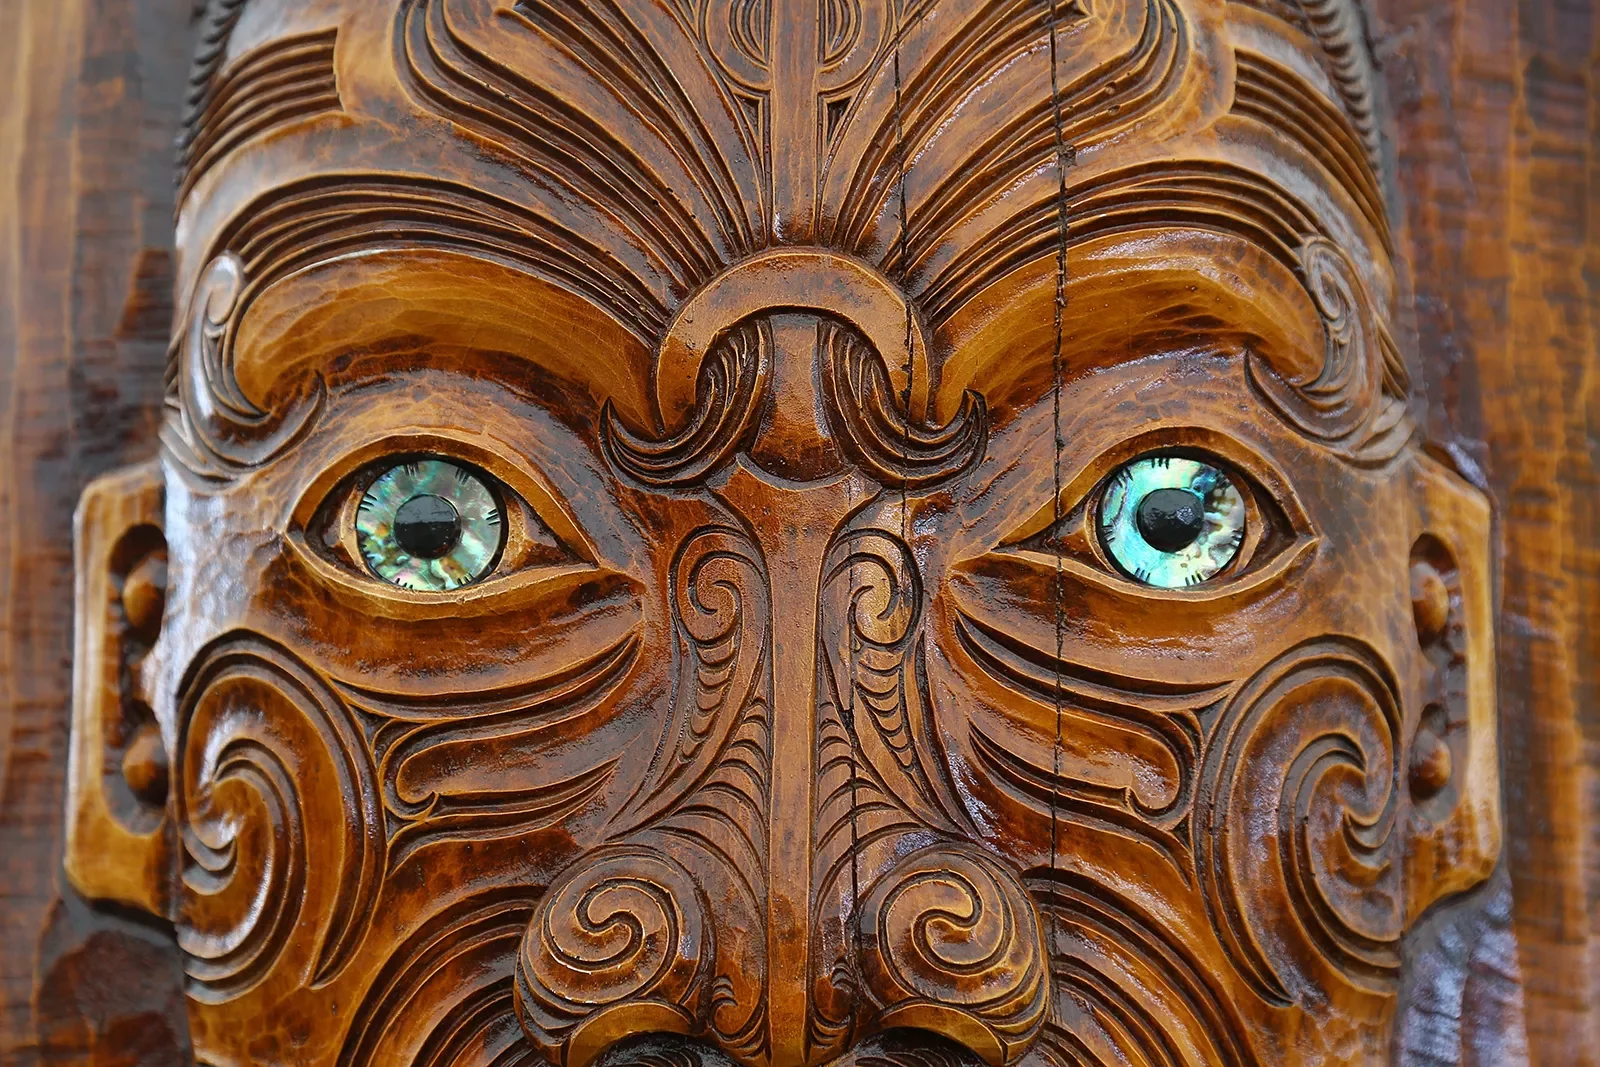 Carved face in Maori style, New Zealand